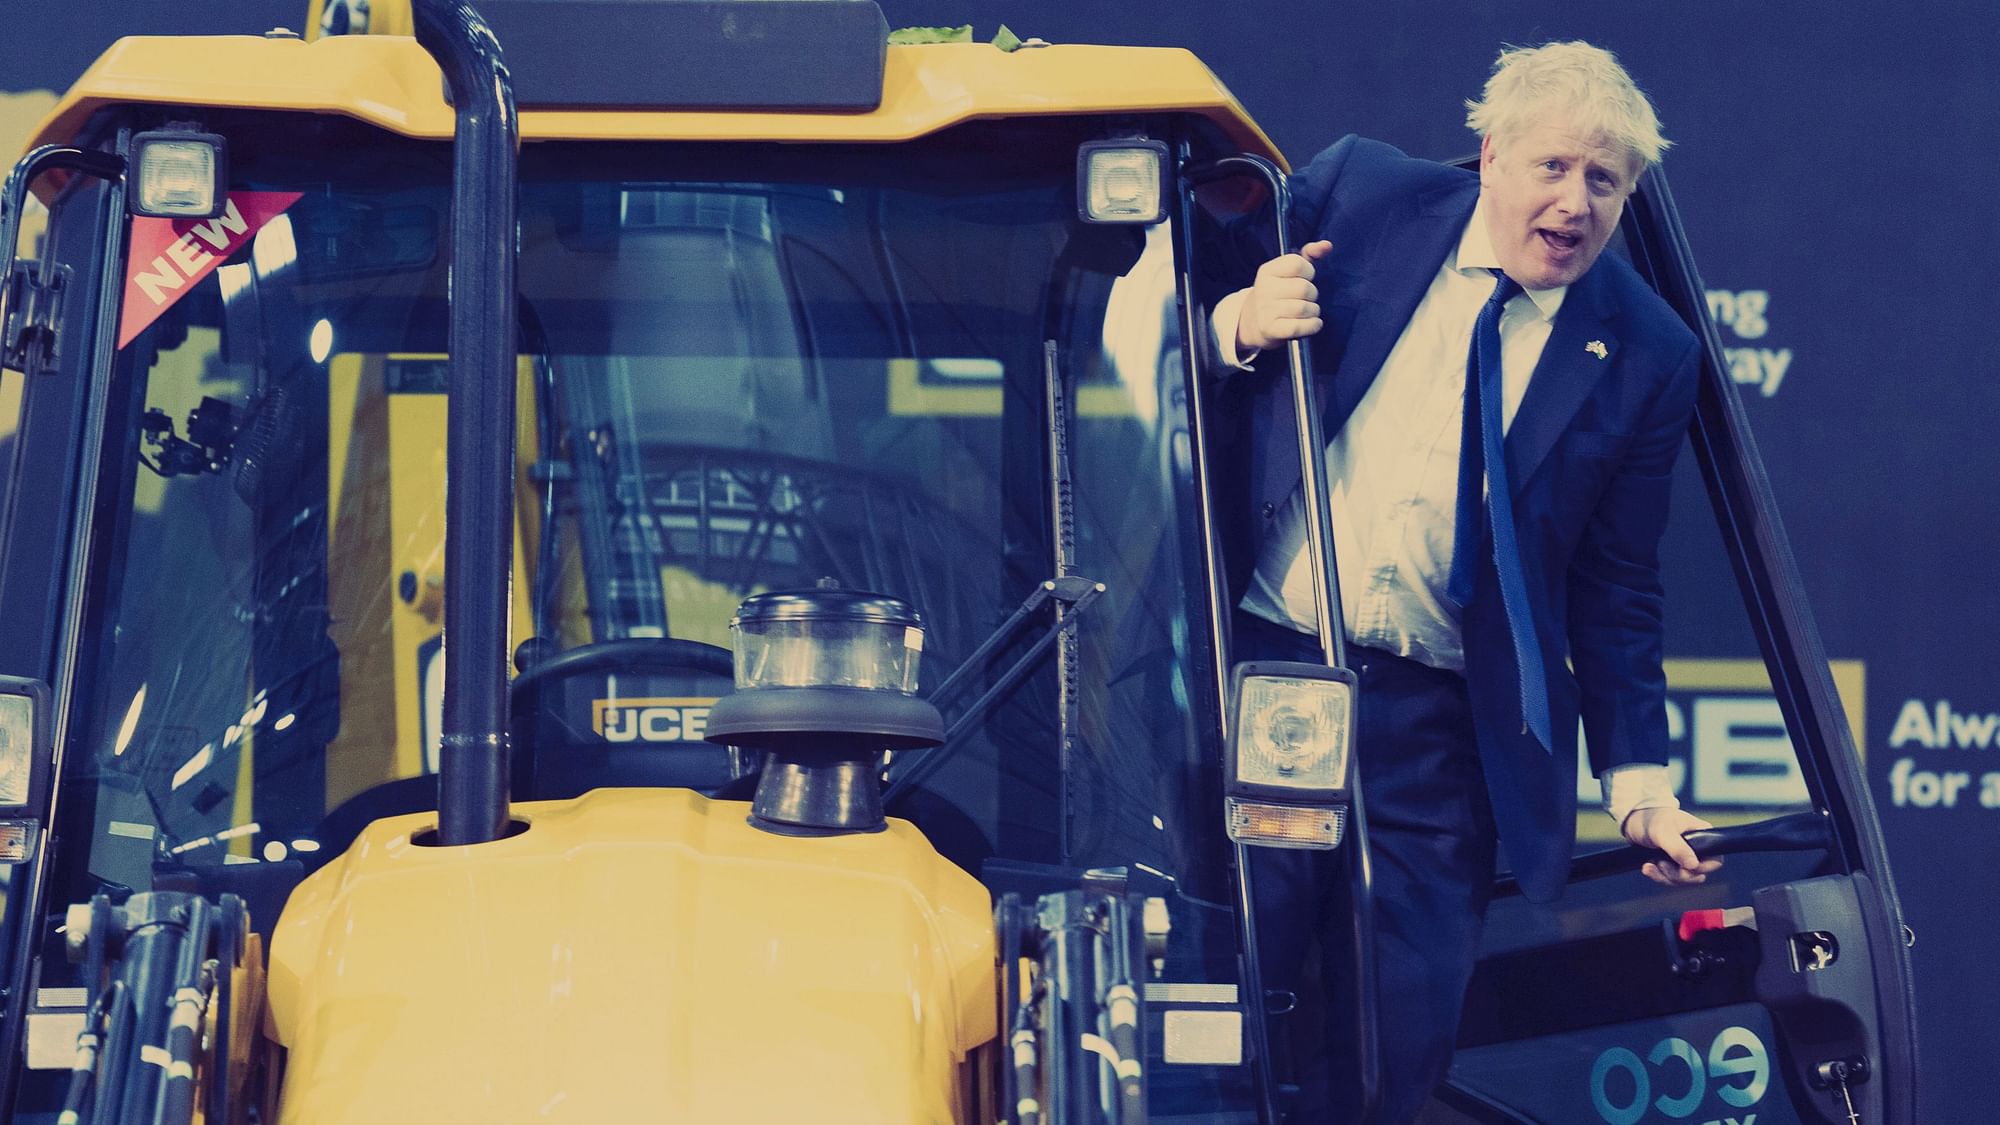 <div class="paragraphs"><p>Vadodara: British Prime Minister Boris Johnson climbs onto a JCB at the new JCB Factory in Vadodara, Gujarat, as part of his two-day trip to India on Thursday, 21 April.&nbsp;</p></div>